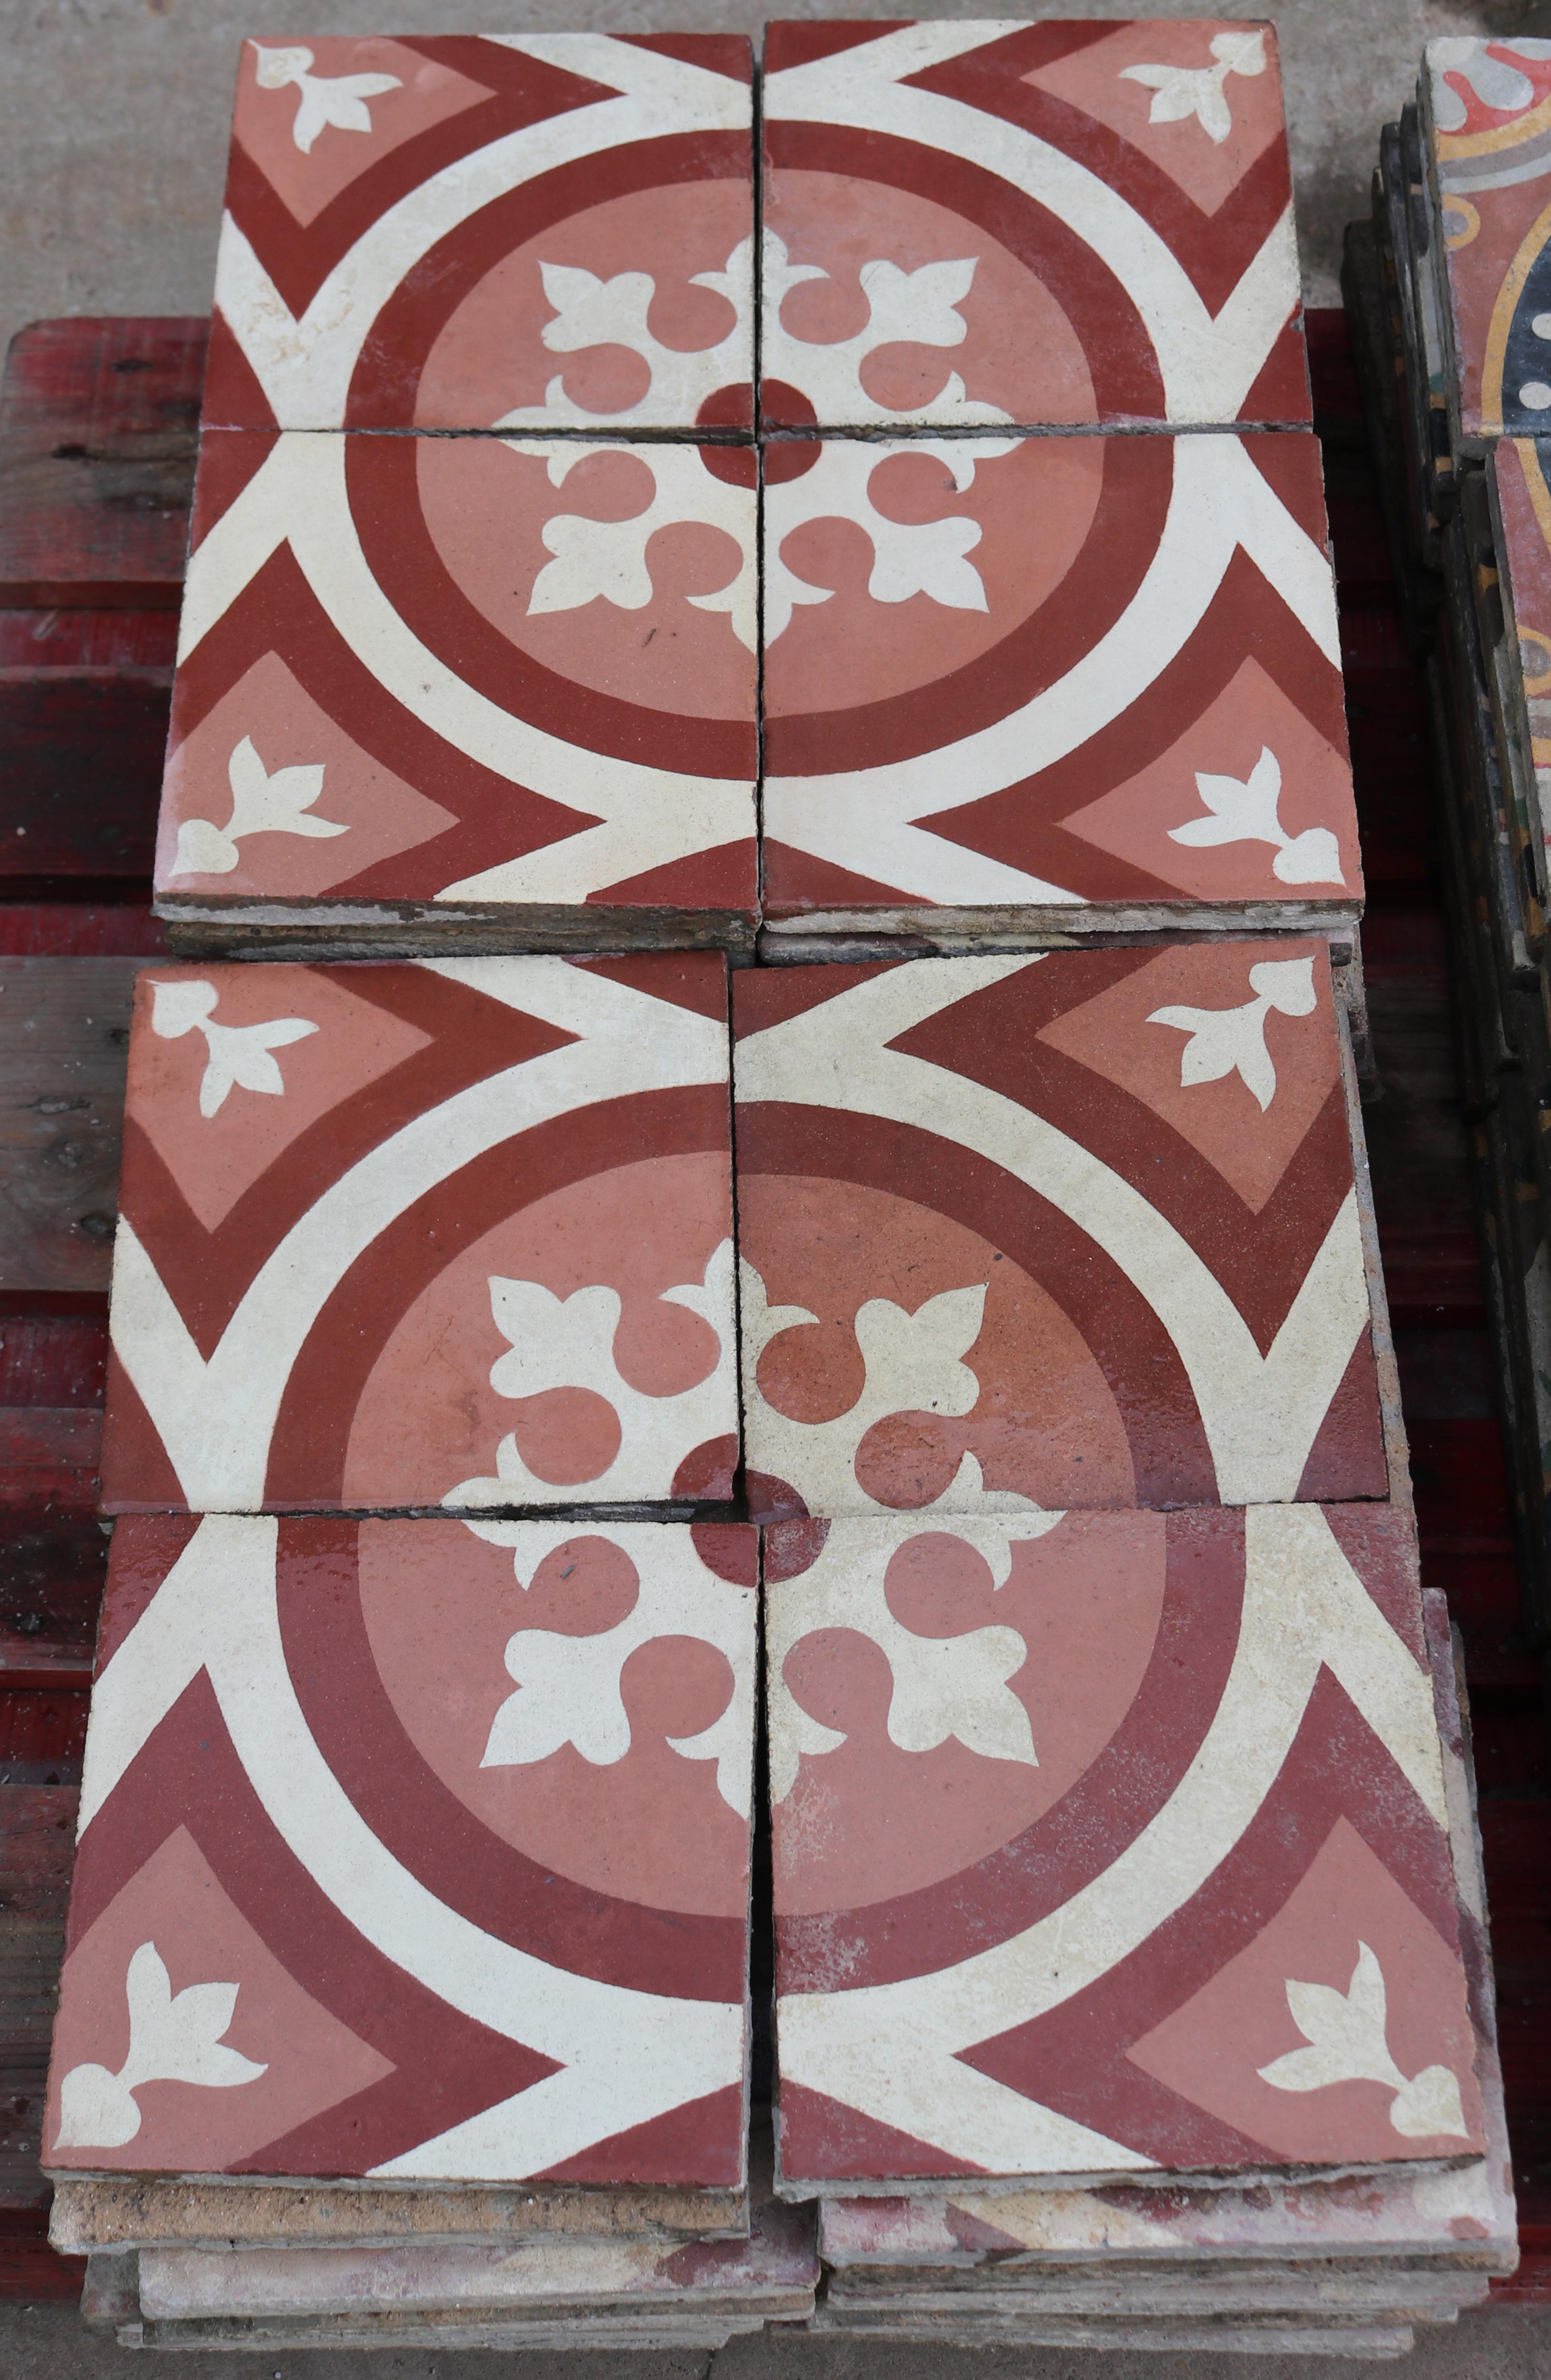 Set of 60 Reclaimed Patterned Encaustic Floor Tiles In Fair Condition For Sale In Wormelow, Herefordshire